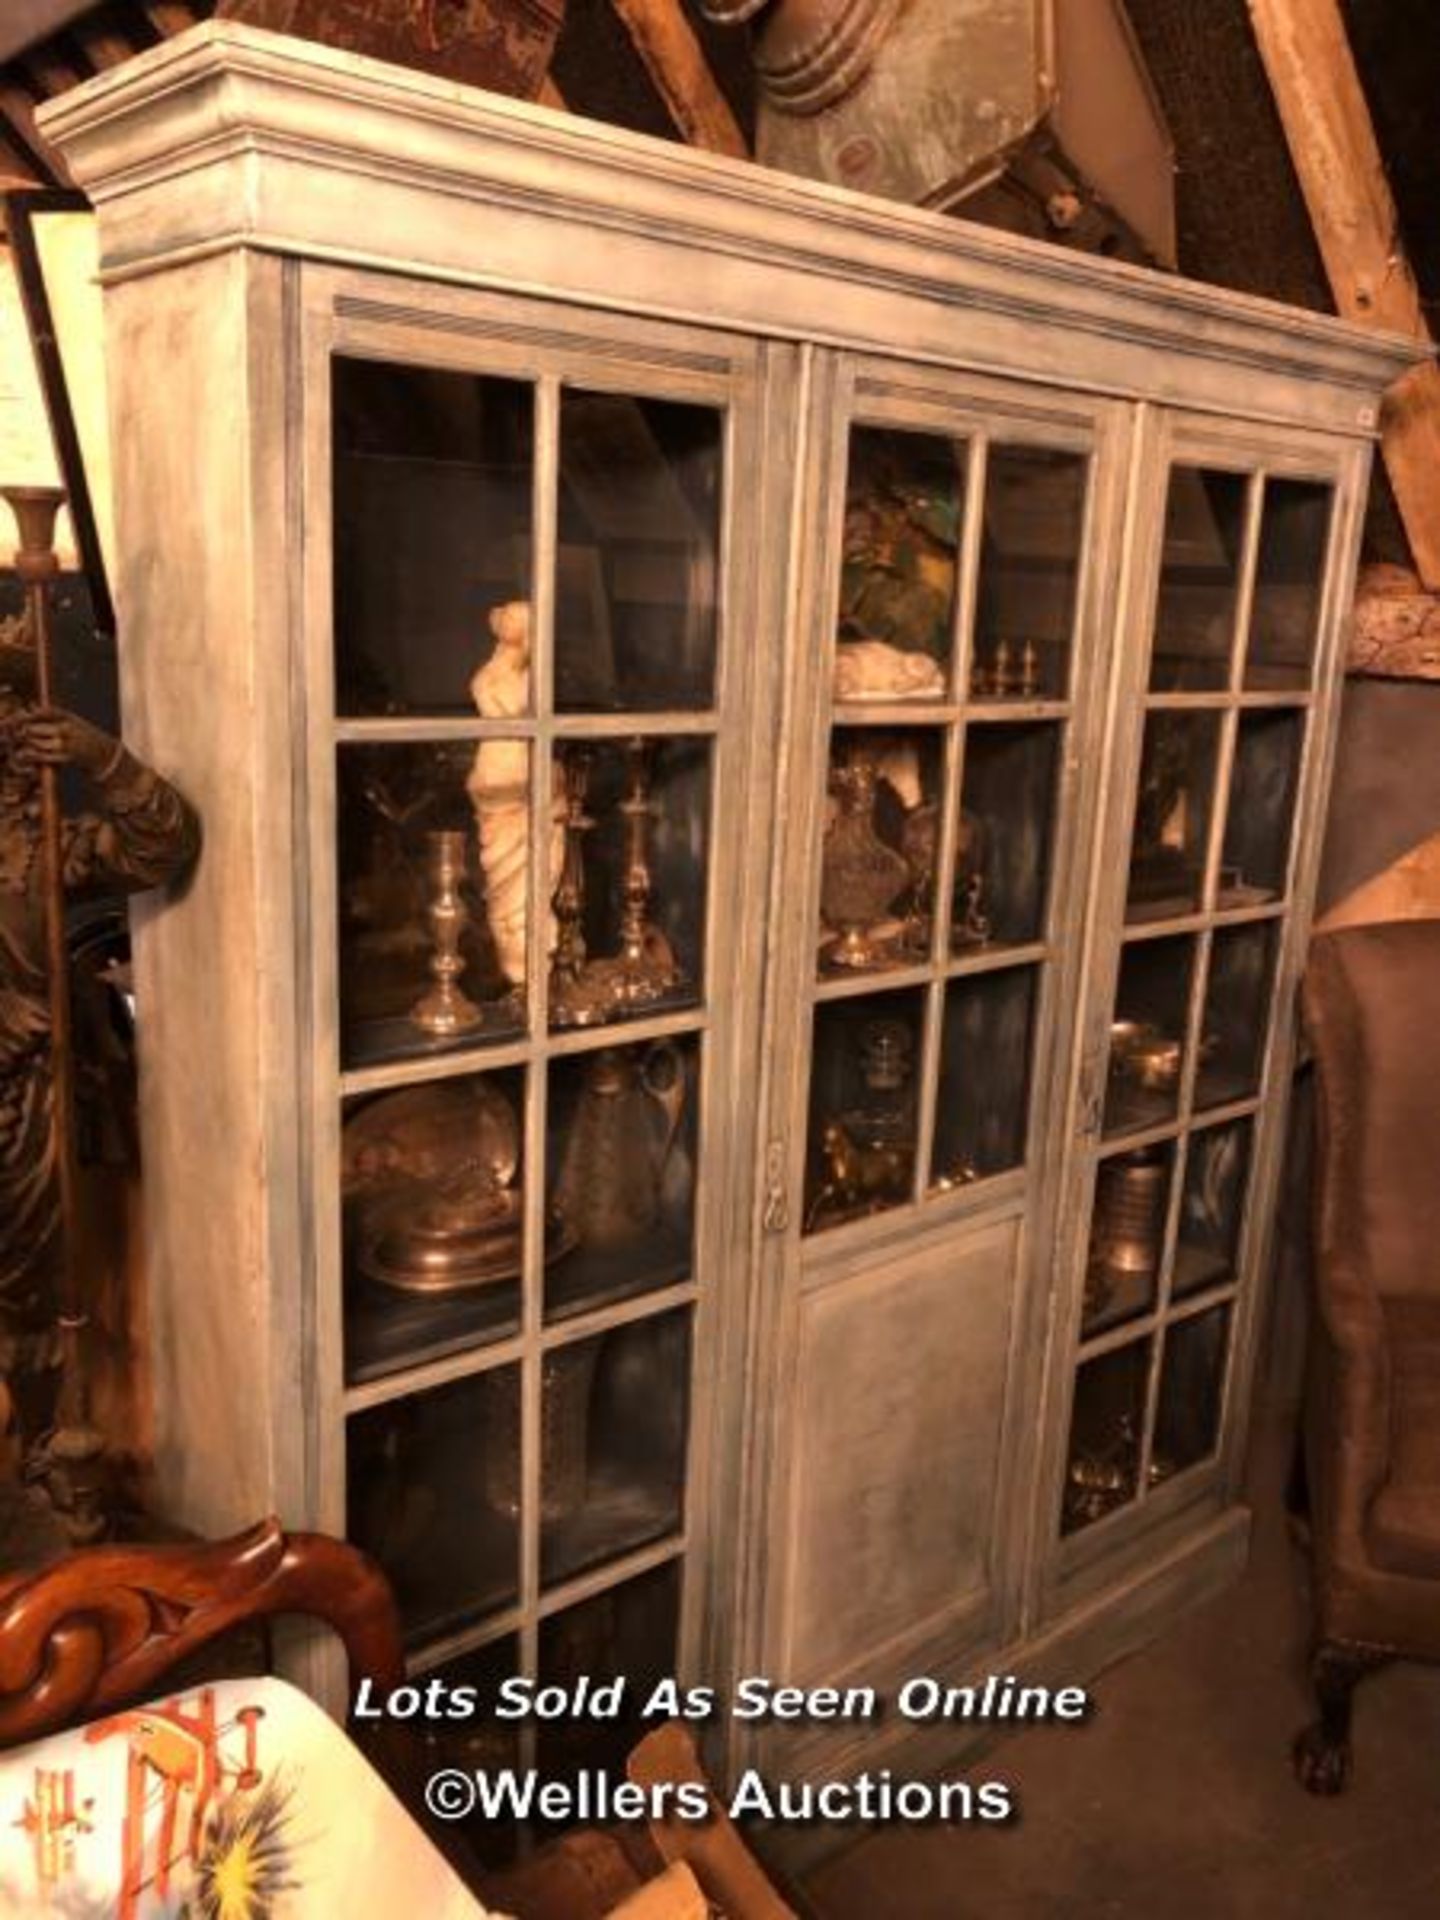 CIRCA 1900 THREE DOOR GLAZED BOOKCASE, ANTIQUE PAINT FINISH, FOUR GLASS PANELS MISSING, 185 X 32 X - Image 3 of 4